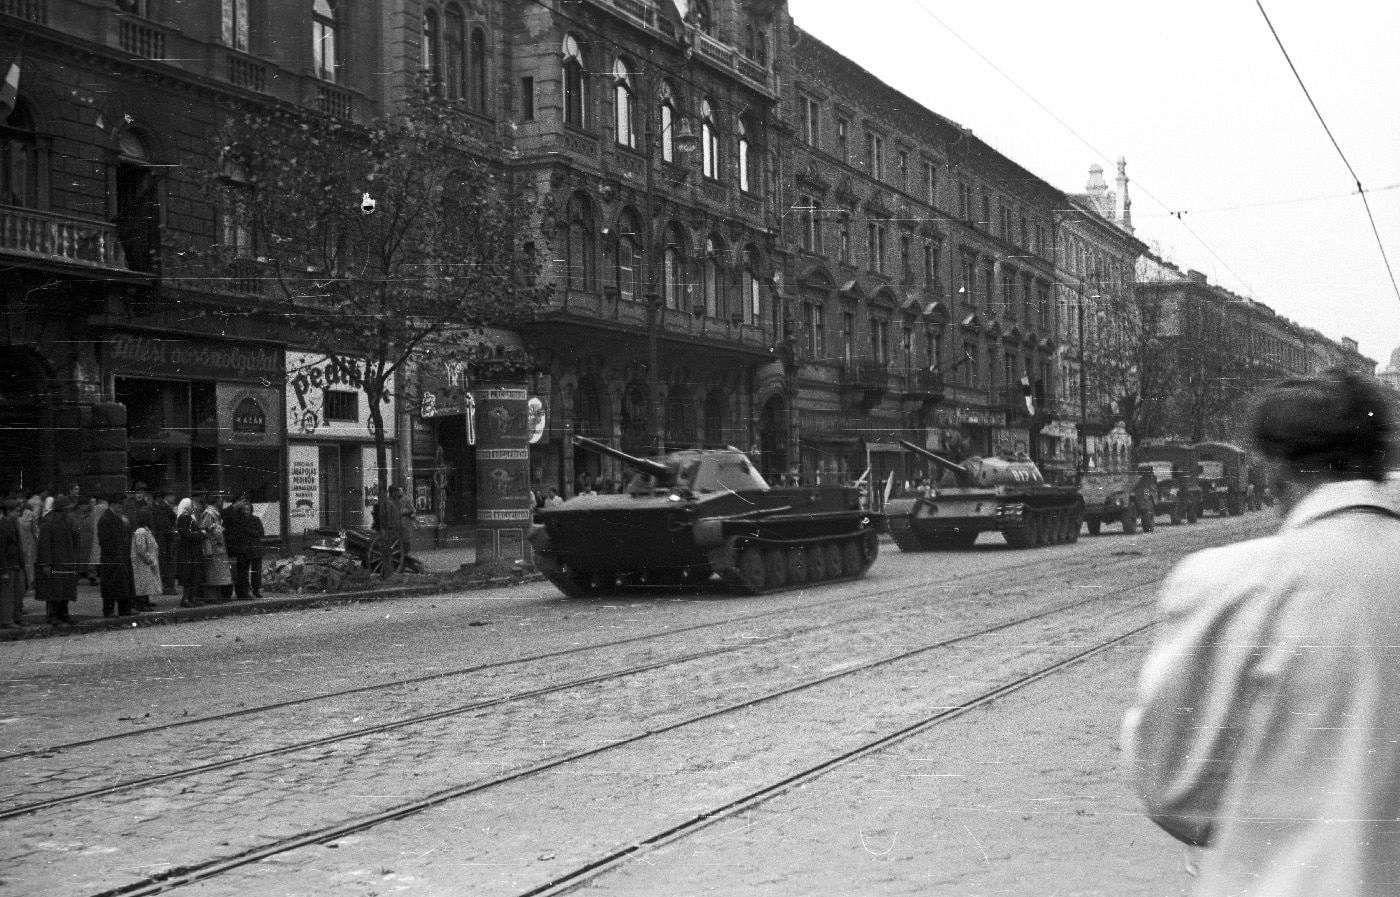 pt-76 leads soviet armored column in hungarian revolution of 1956